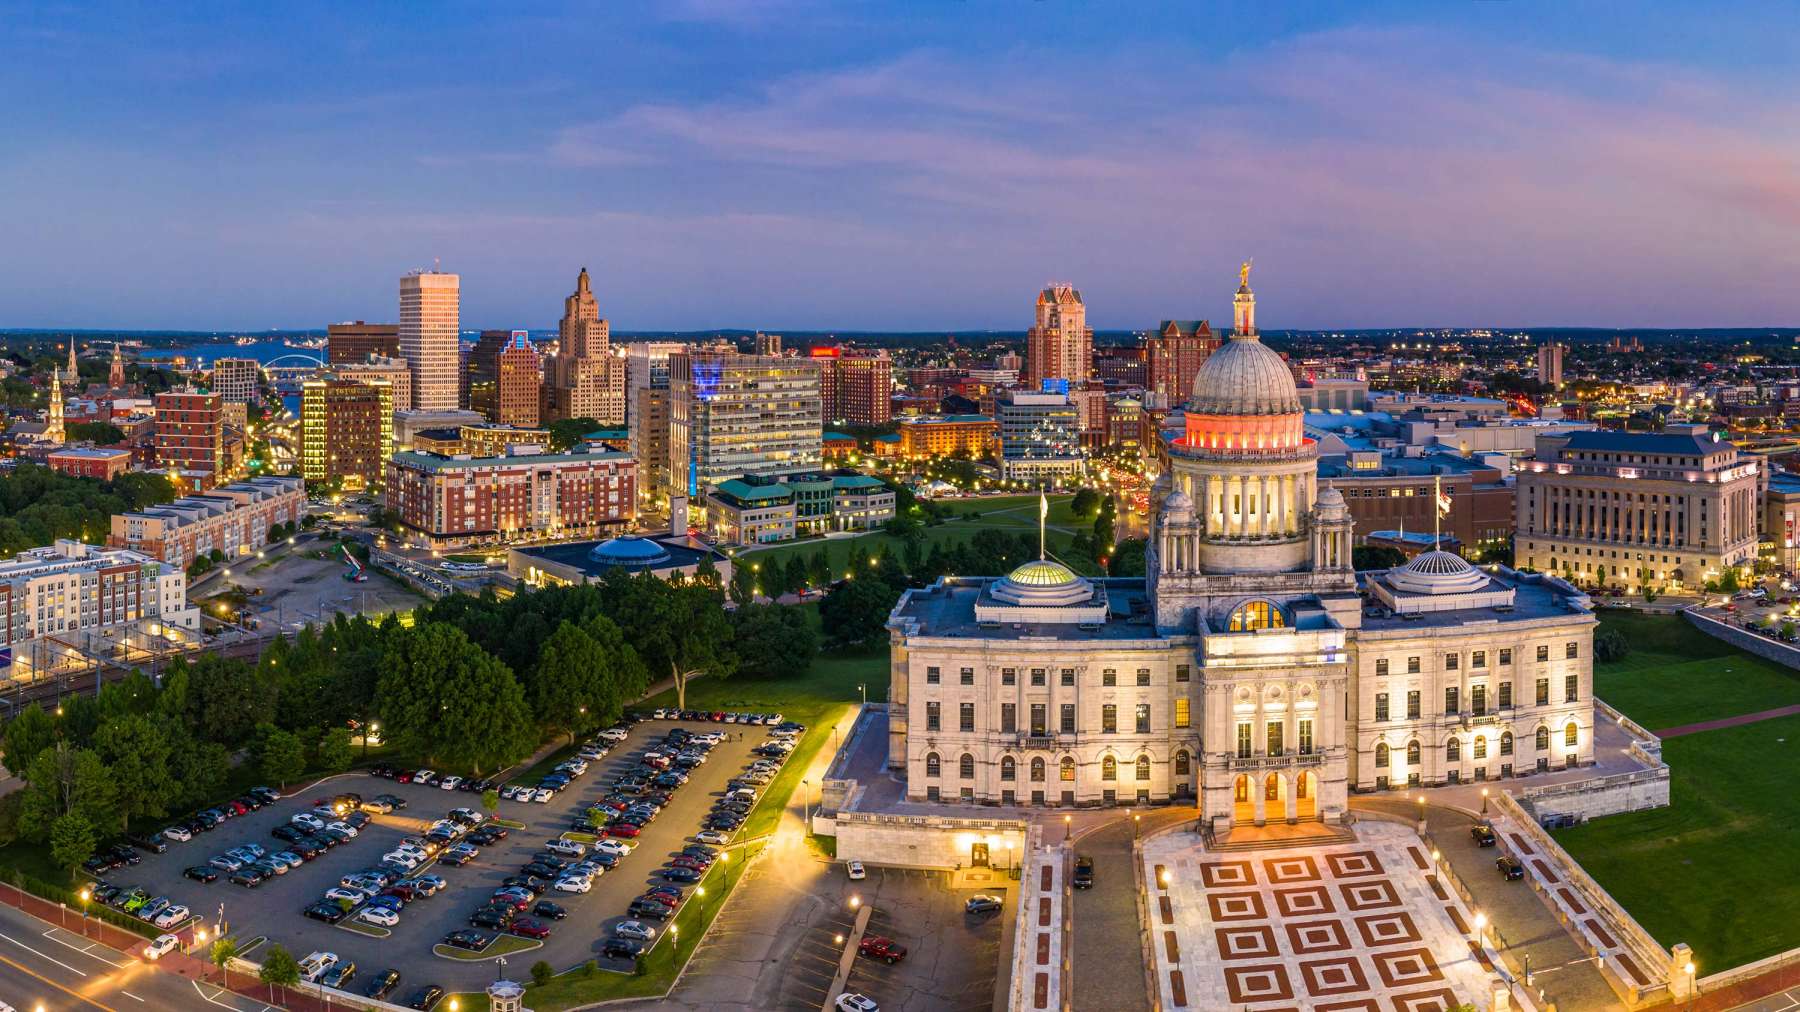 Rhode Island News: EPI Report details four transformative and equity-centered ways Rhode Island can invest ARPA funding